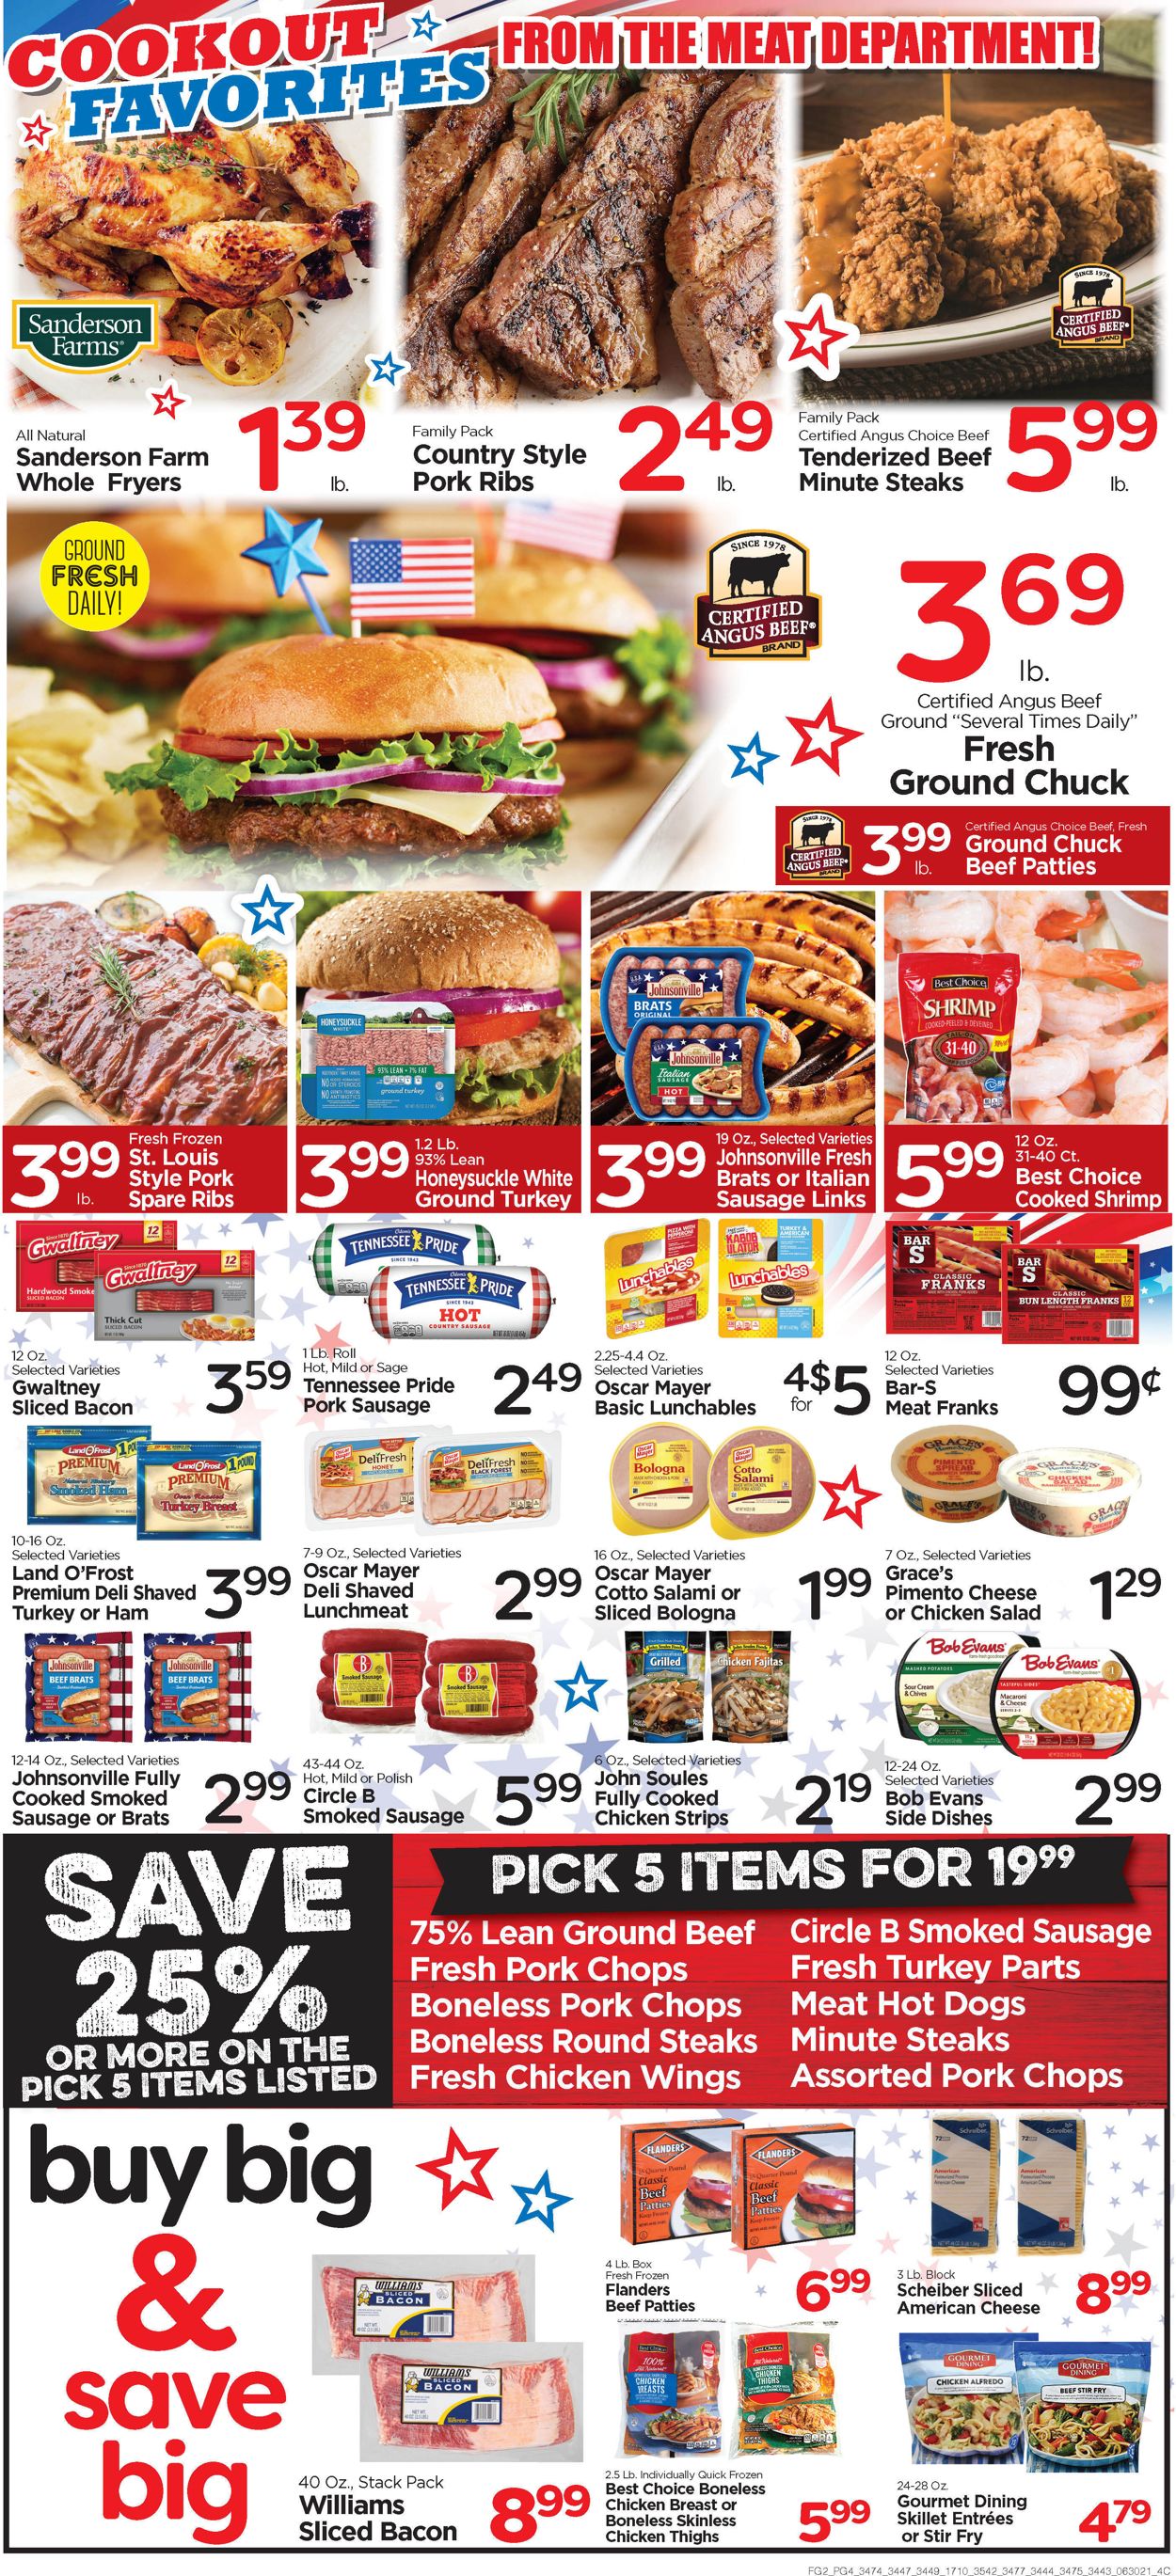 Catalogue Edwards Food Giant from 06/30/2021